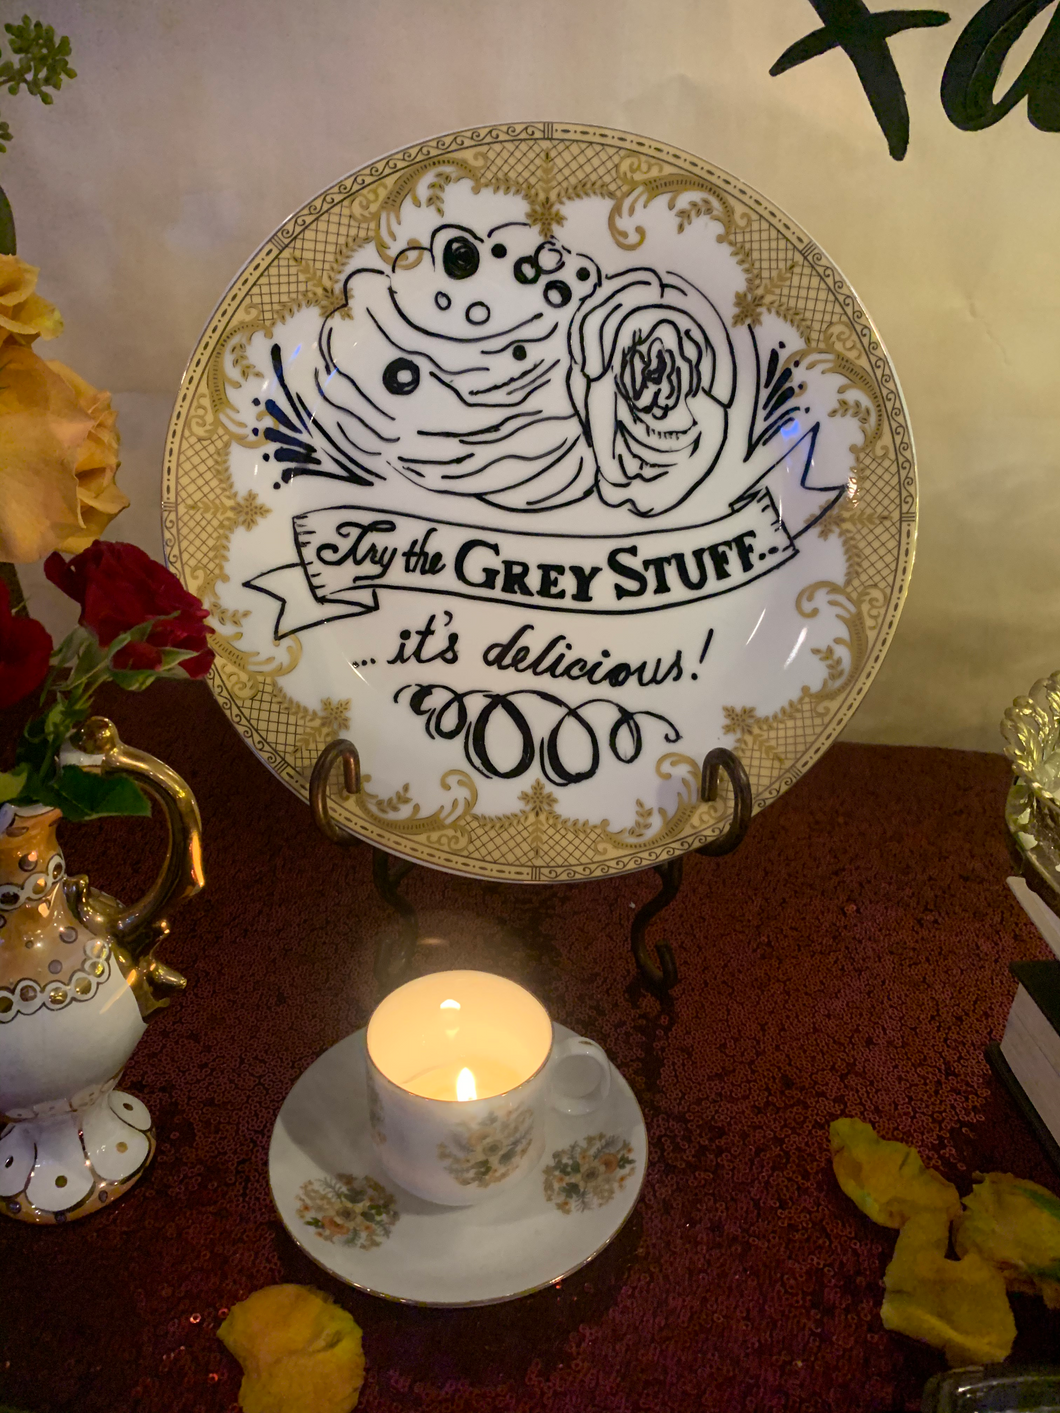 Beauty and The Beast Plate Decor- Try the Gray Stuff its Delicious